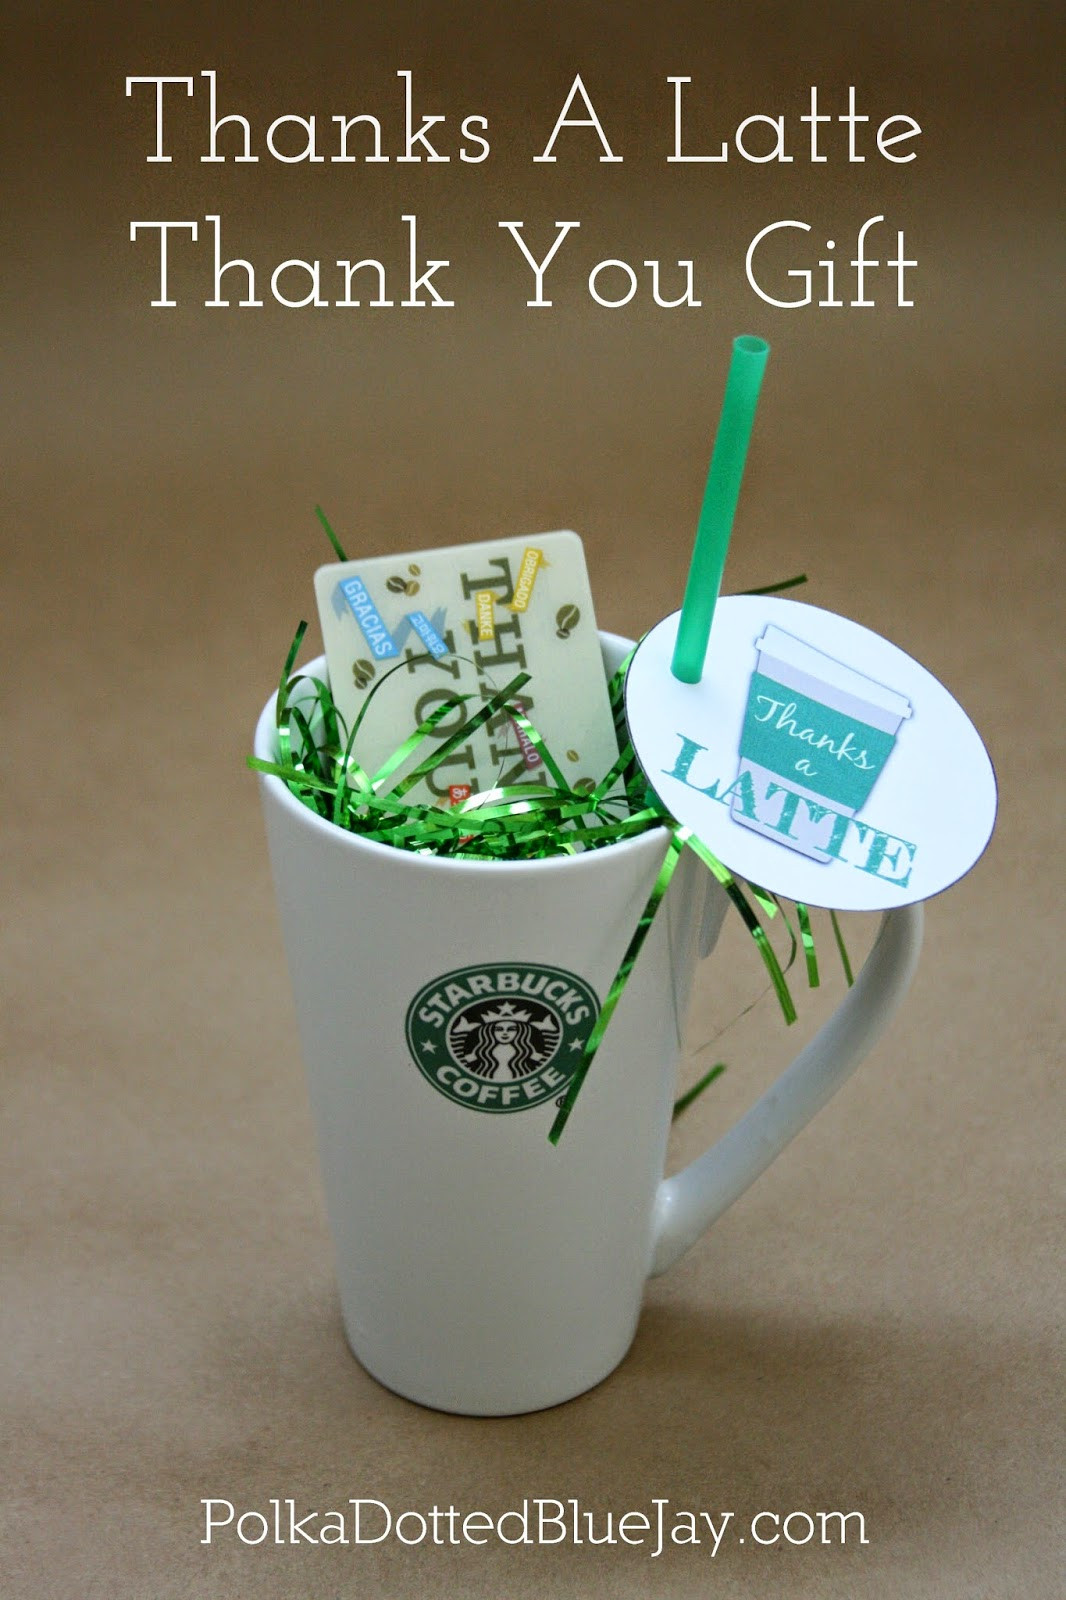 Thank You Gift Ideas For Your Boss
 Thanks A Latte Thank You Gift Update